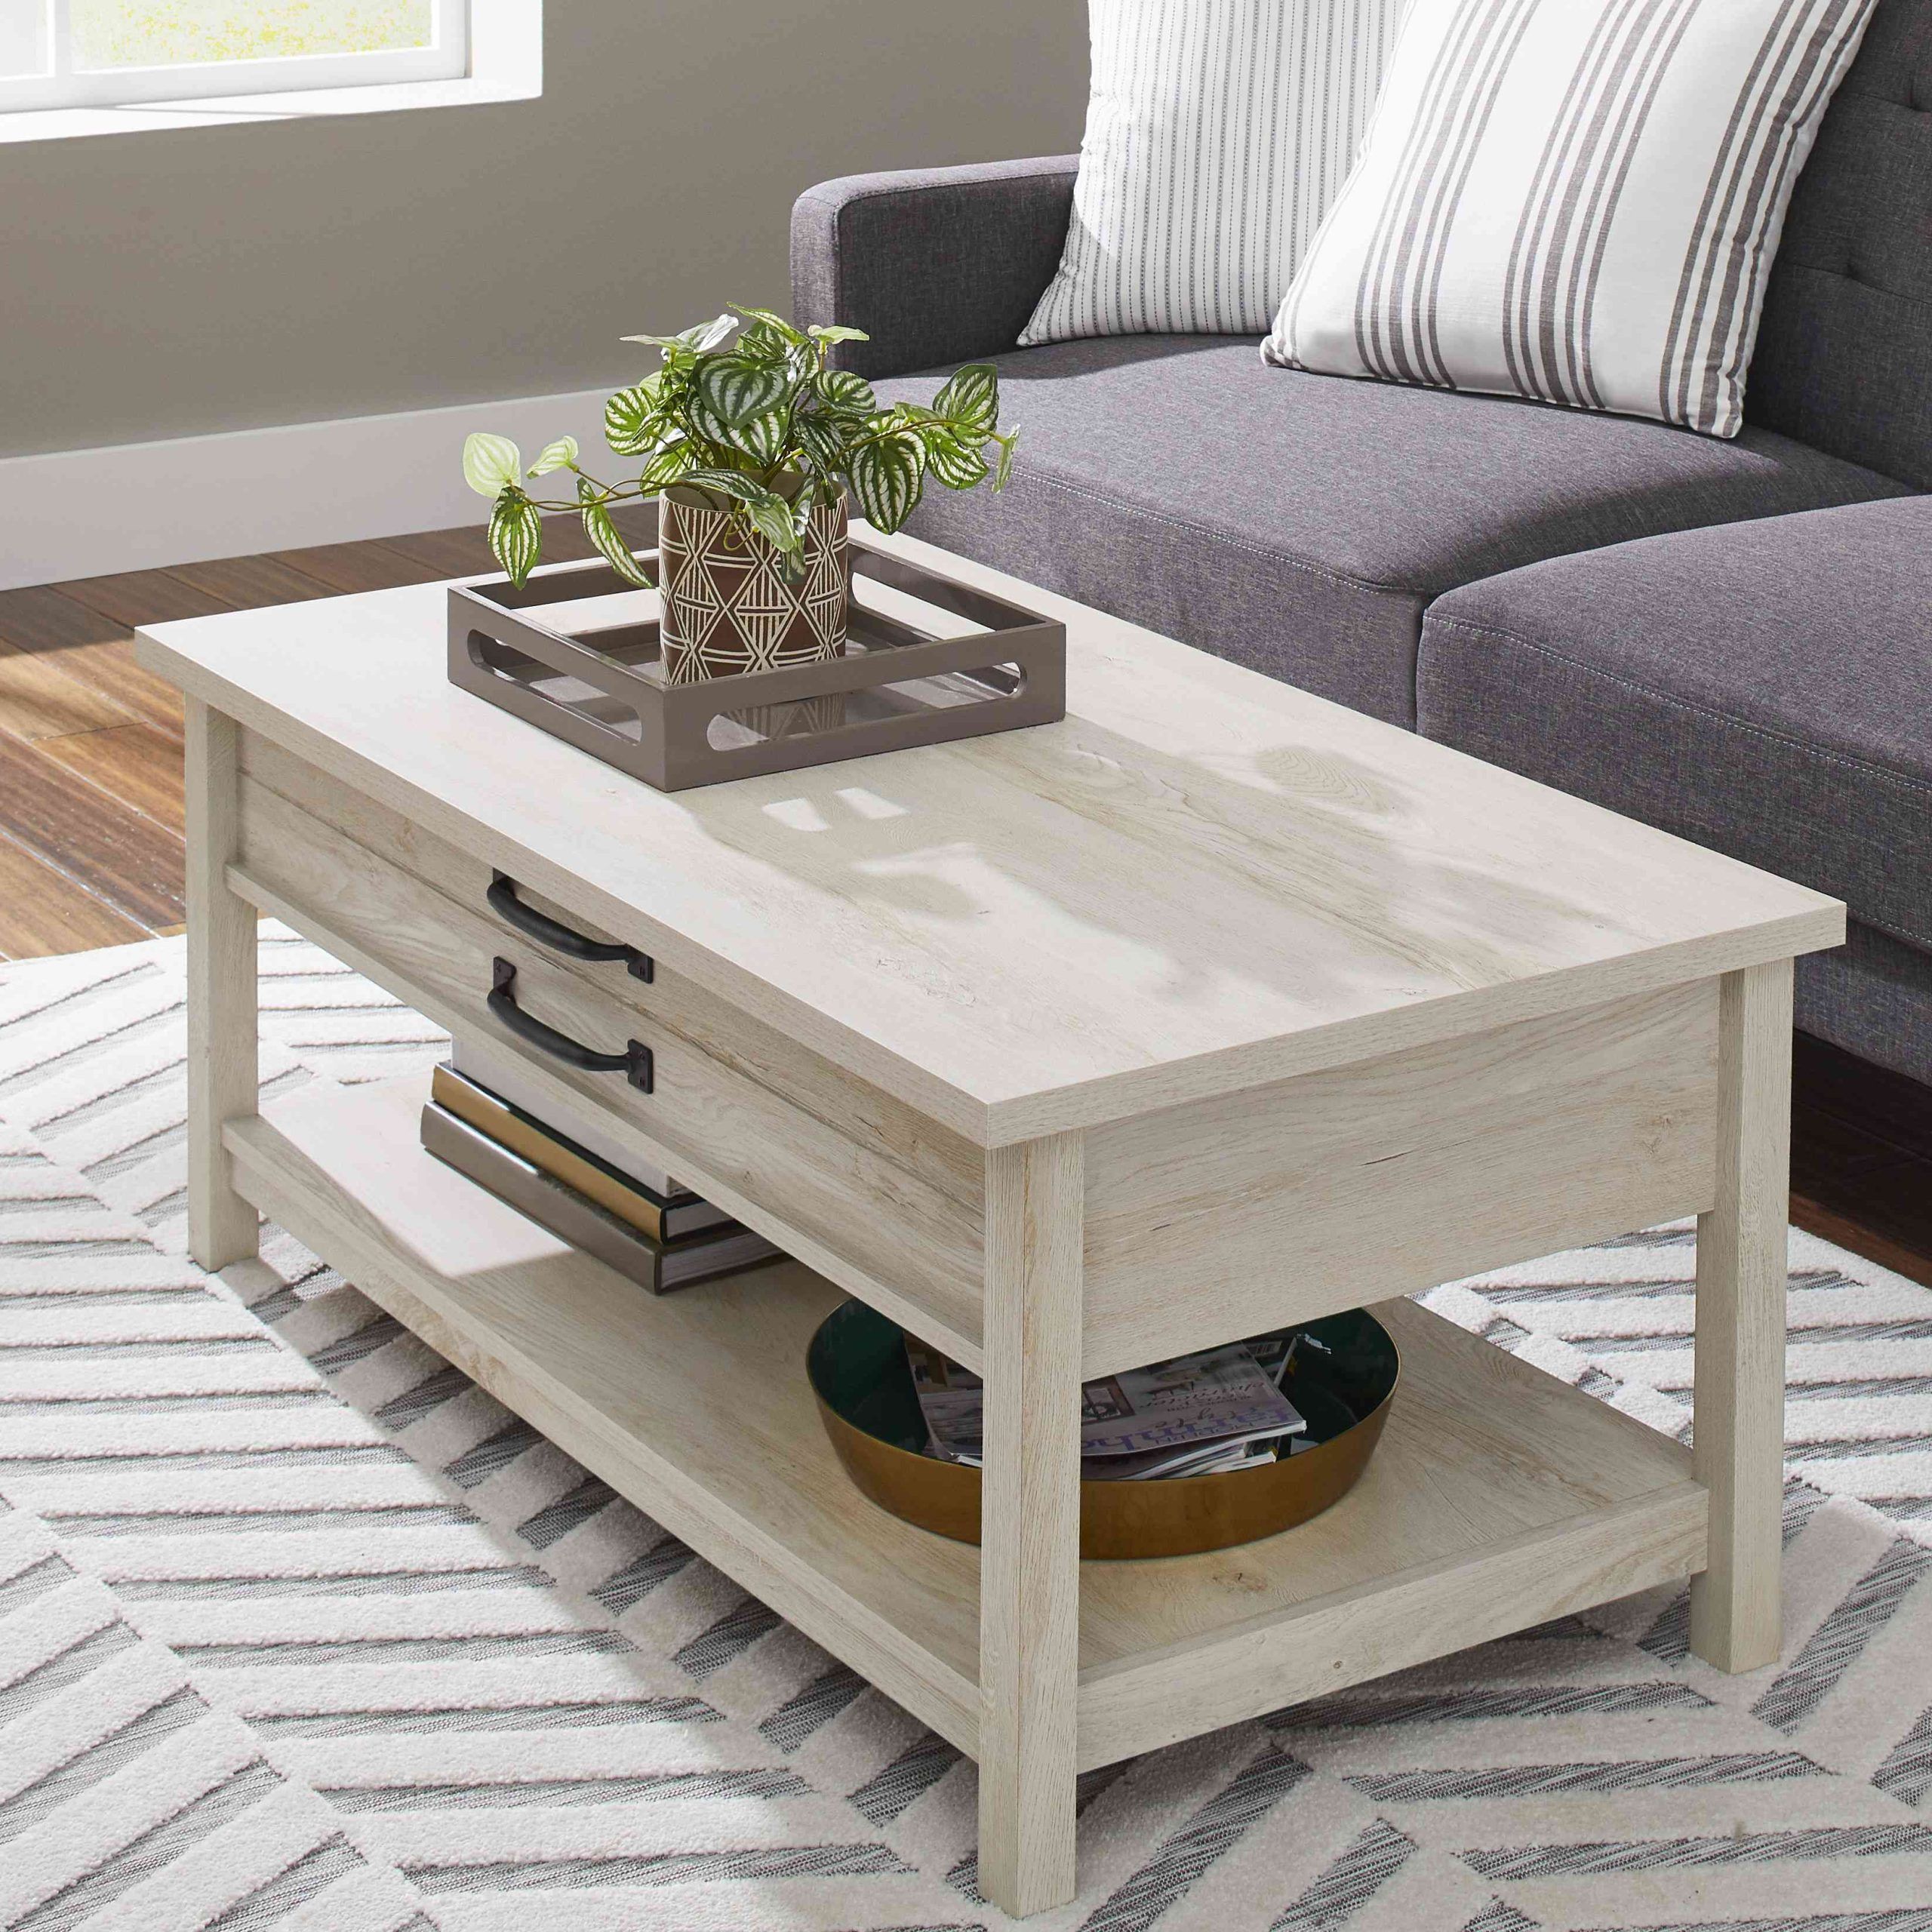 The 9 Best Lift Top Coffee Tables Of 2022 Within Lift Top Coffee Tables With Storage (View 10 of 20)